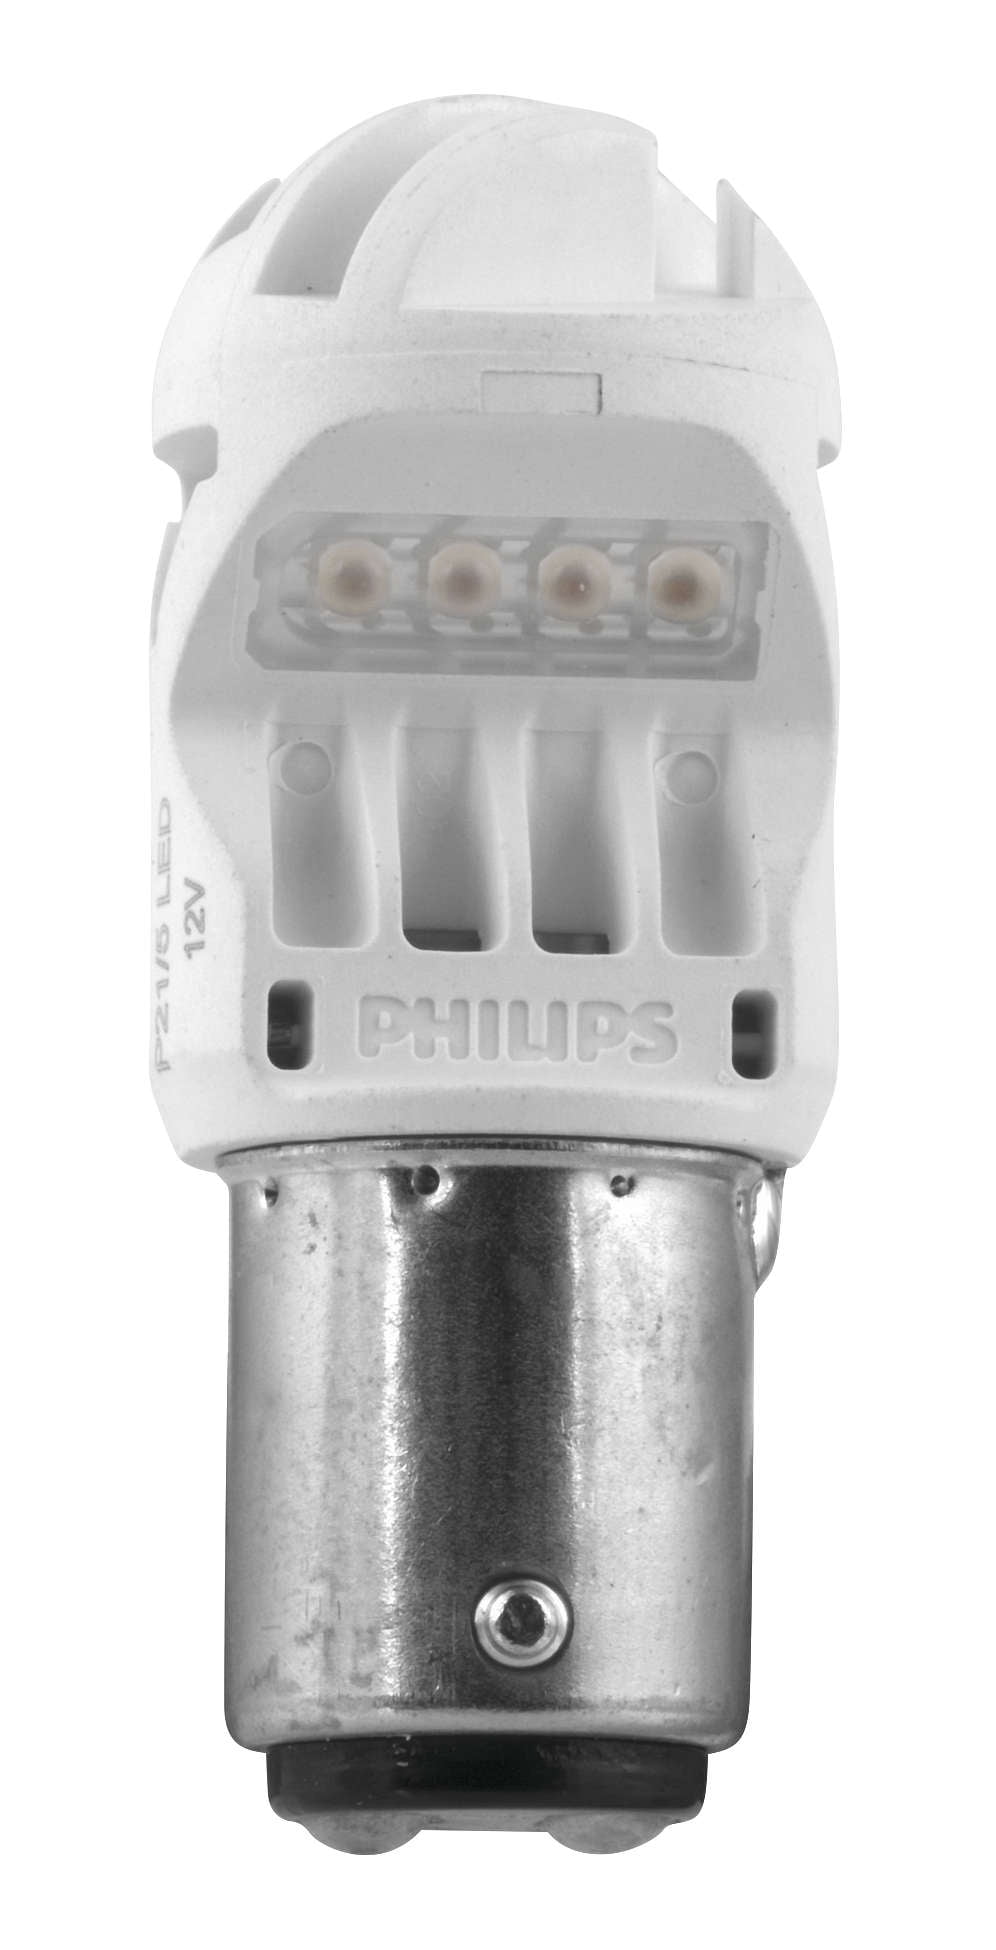  Philips 1157 P21/5W Red X-tremeVision LED Exterior